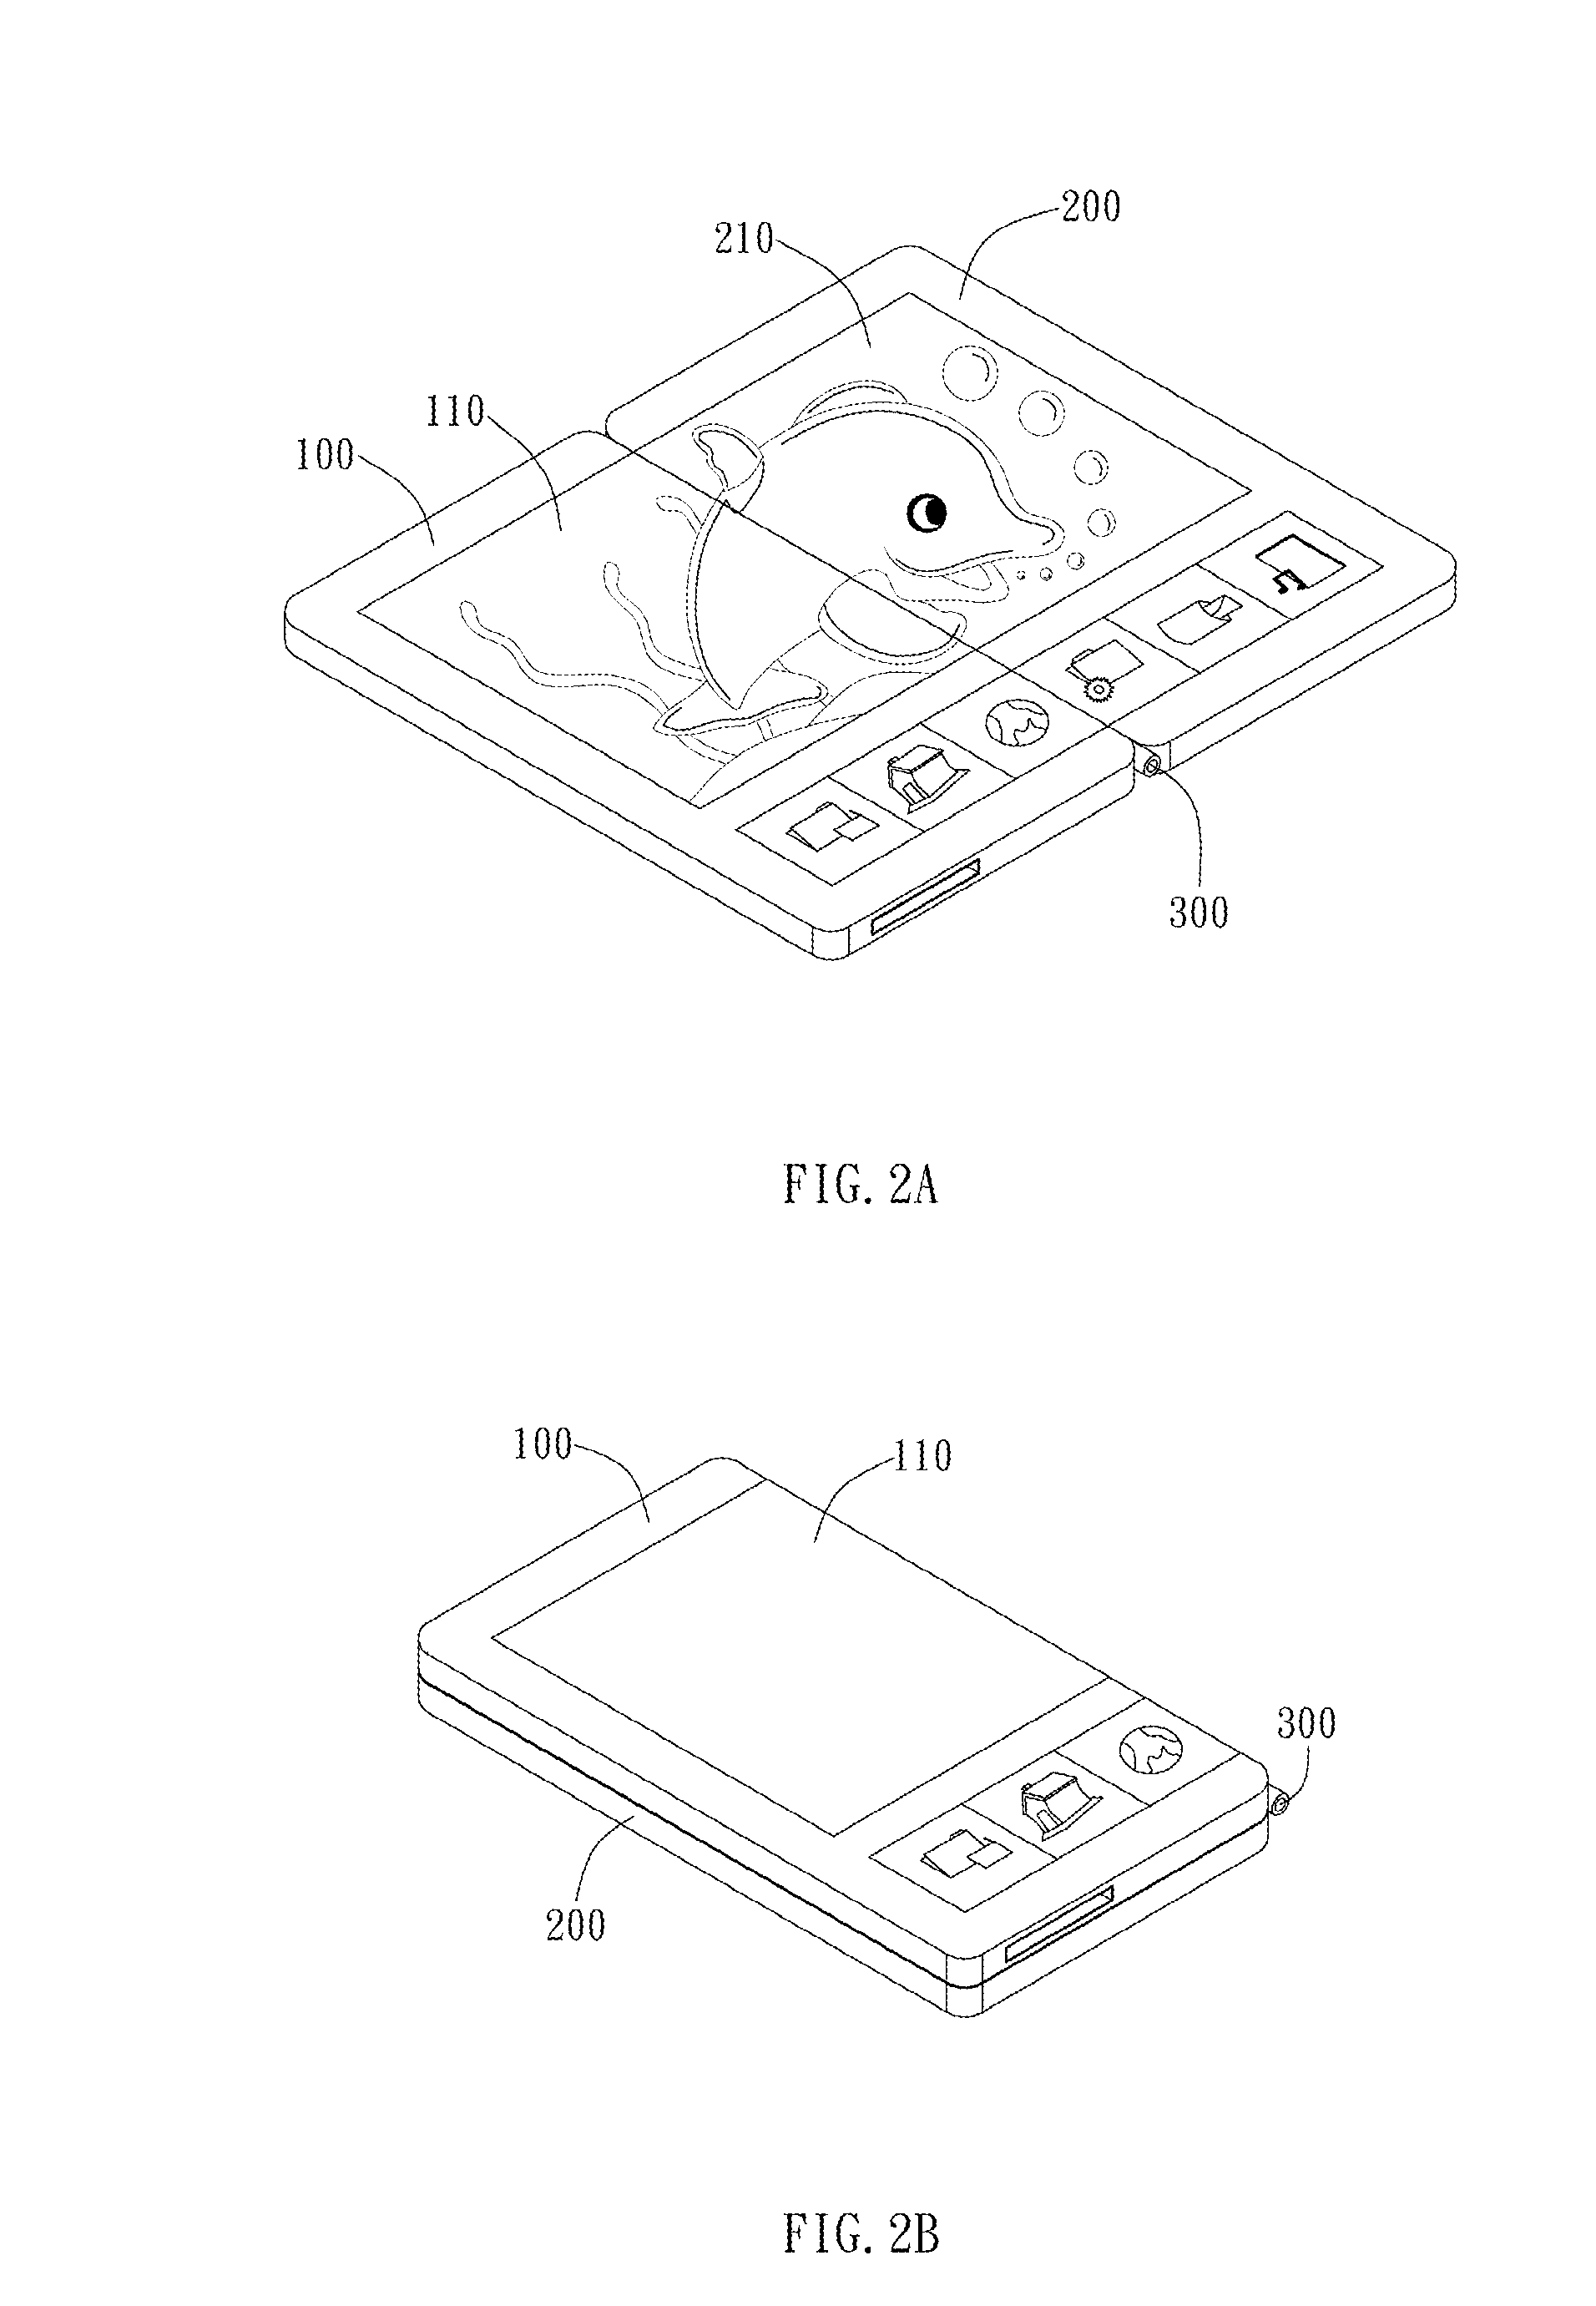 Display Device with Multiple Display Modules